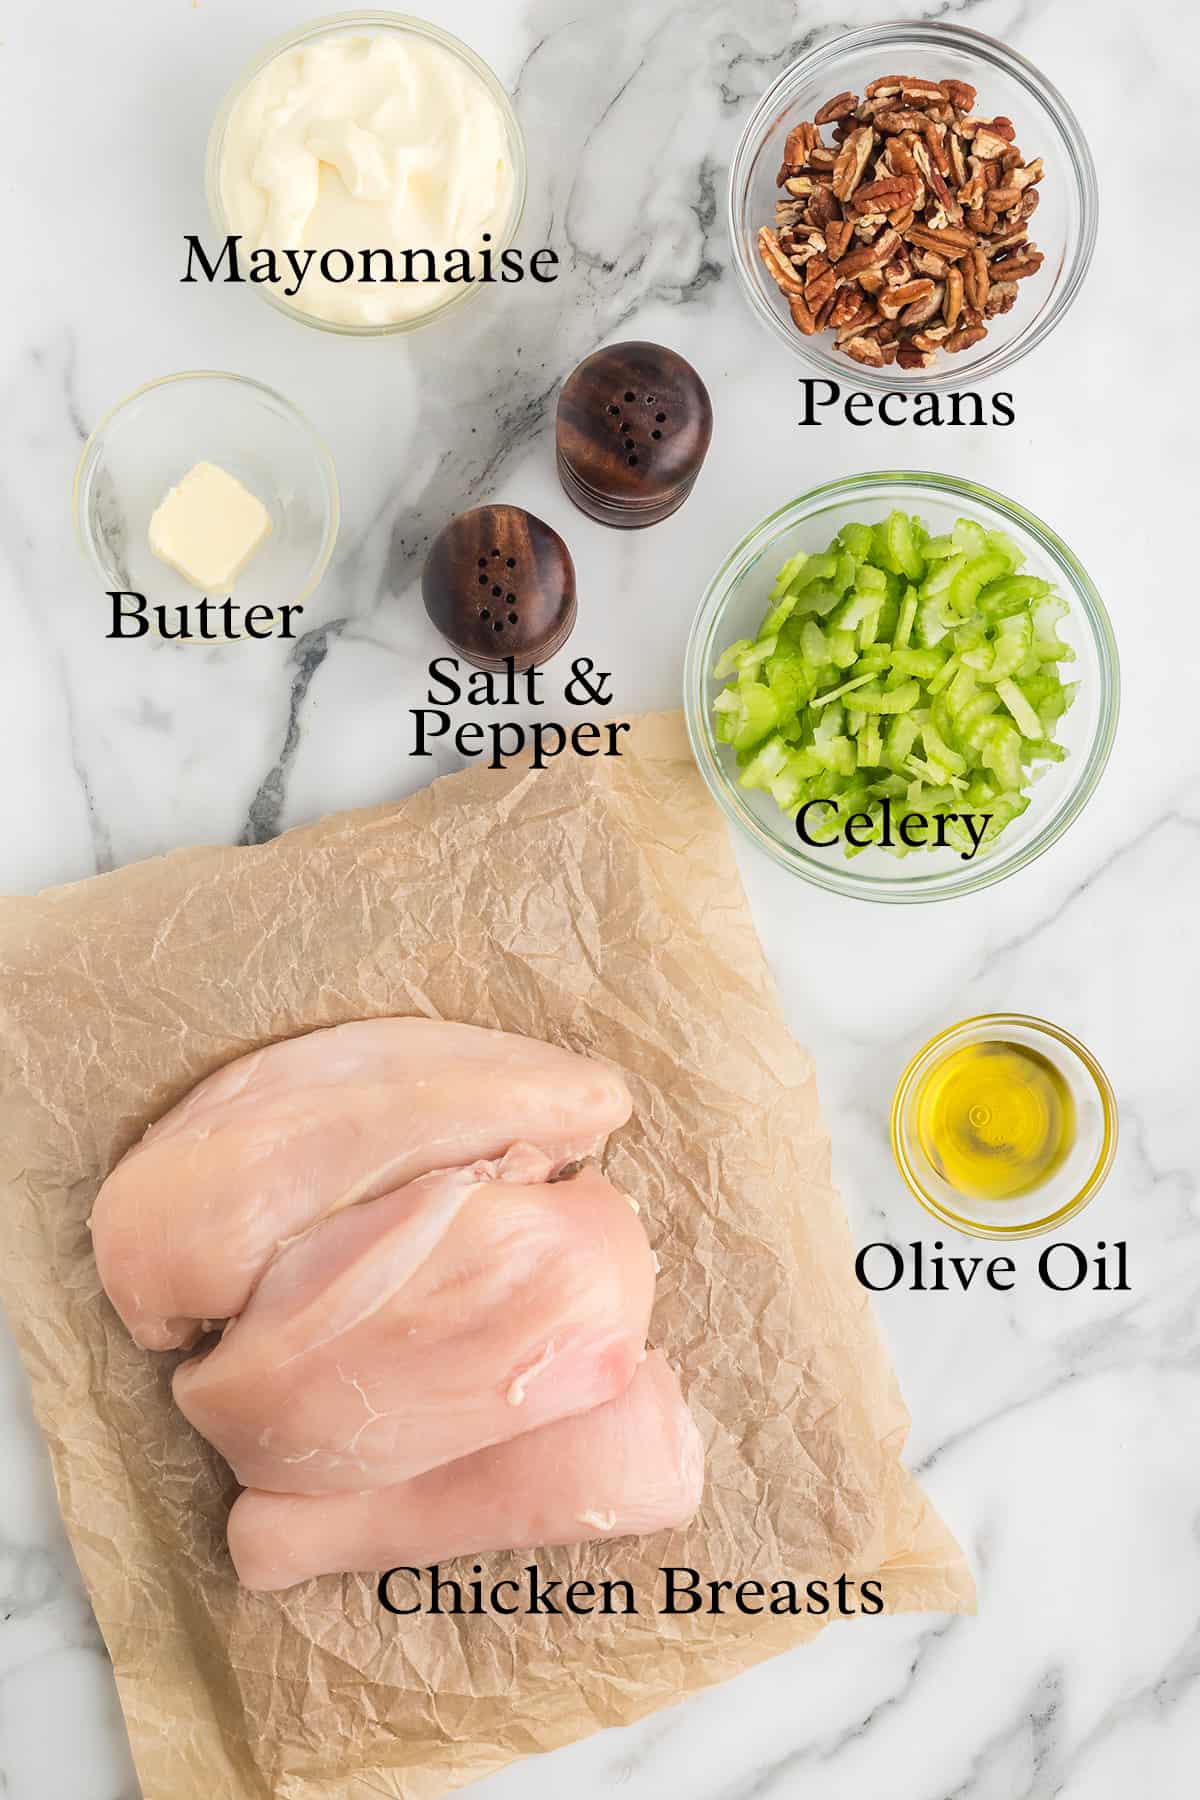 All ingredients used in the recipe.